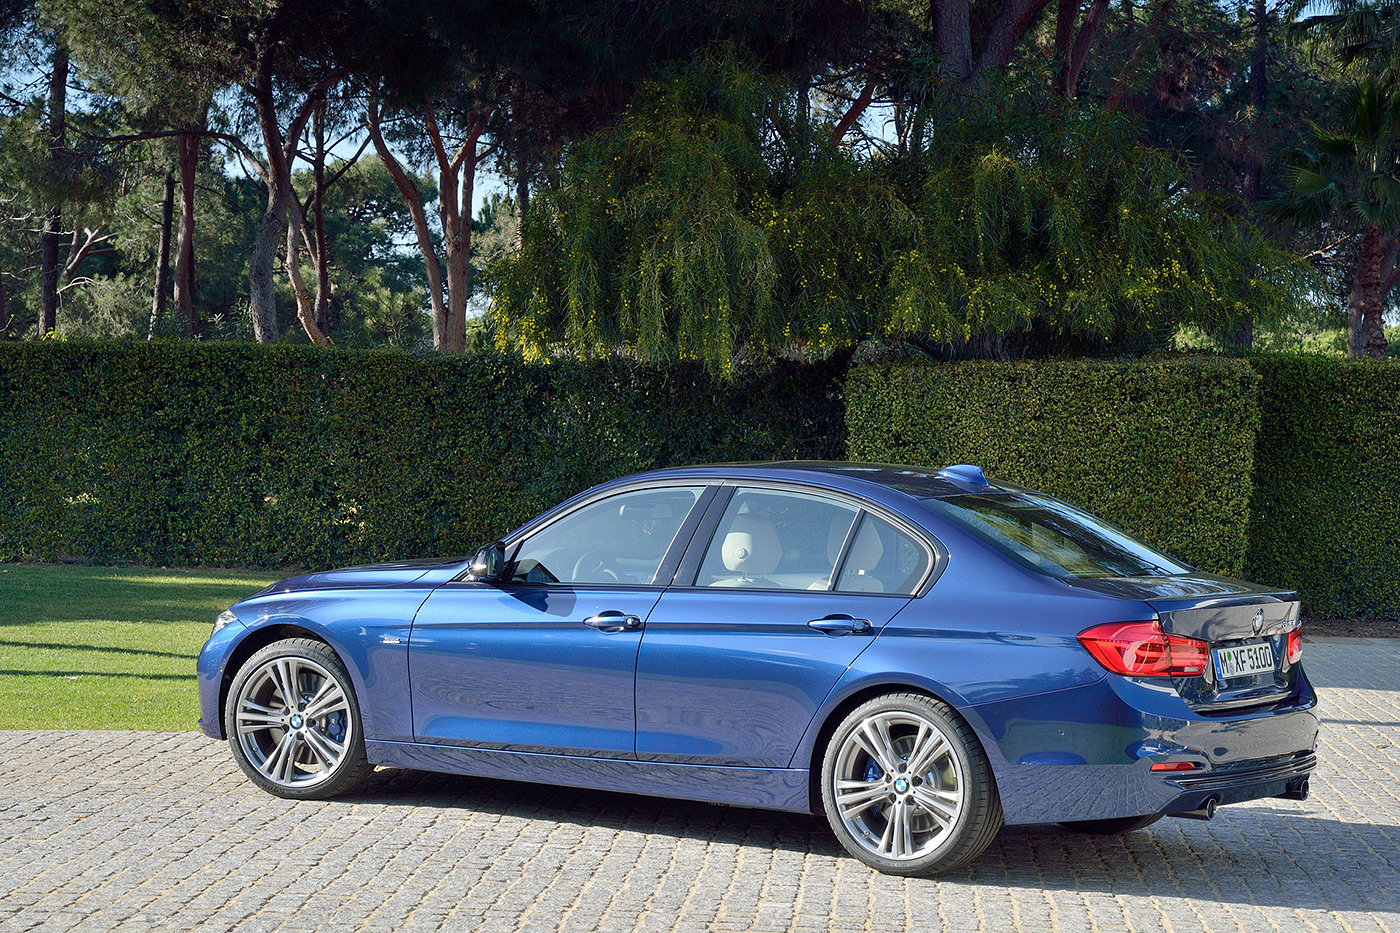 BMW 320d test. How much better is the G20 than the F30 